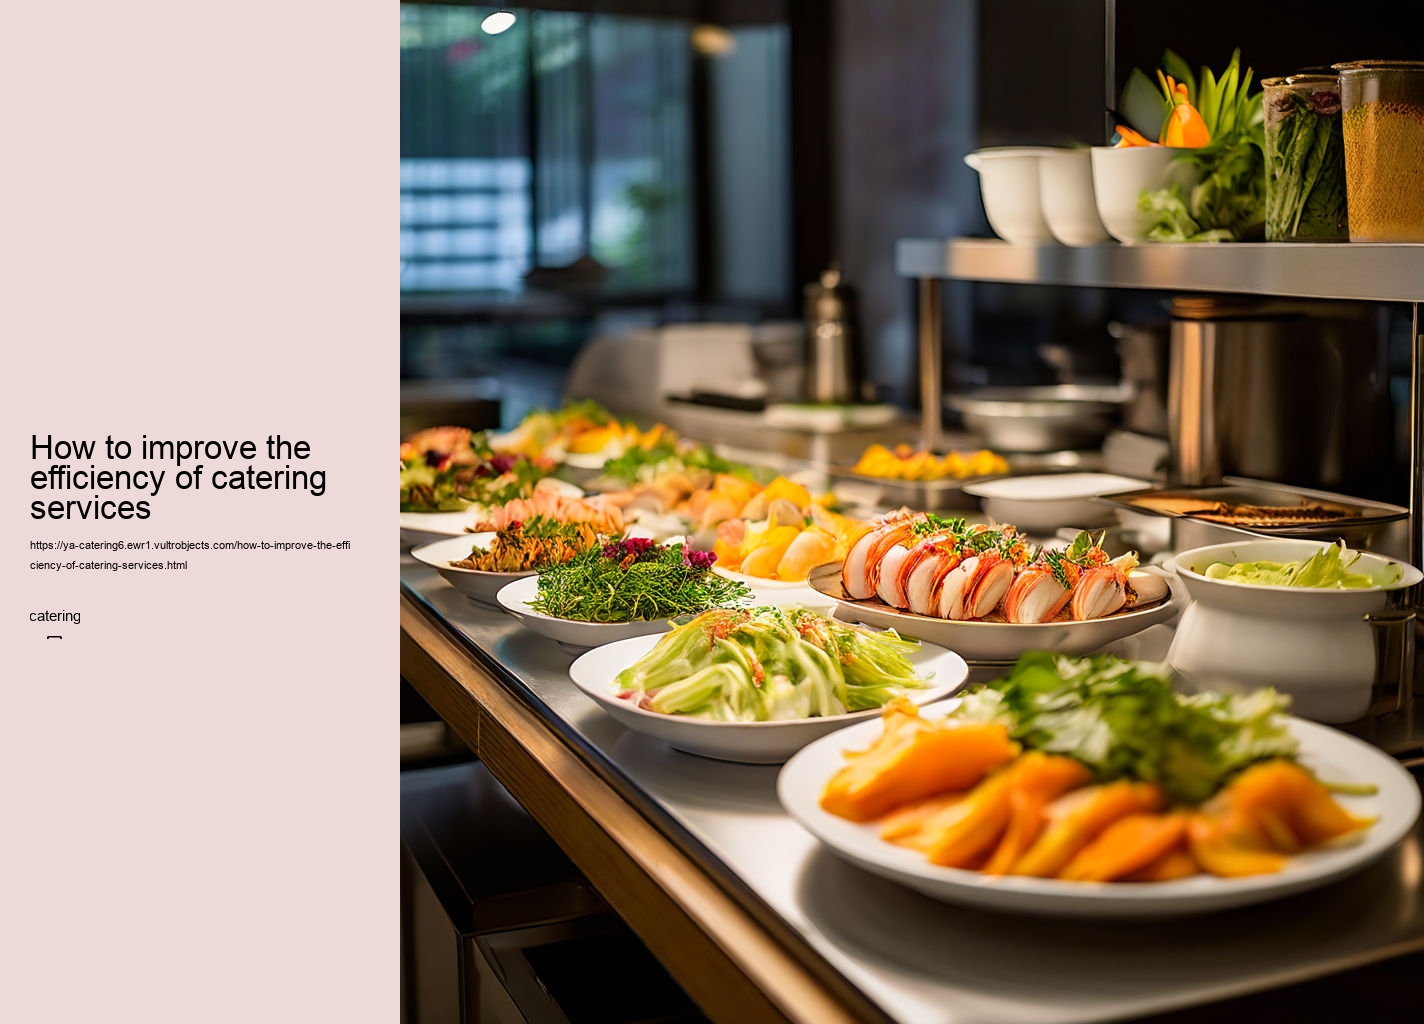 How to improve the efficiency of catering services